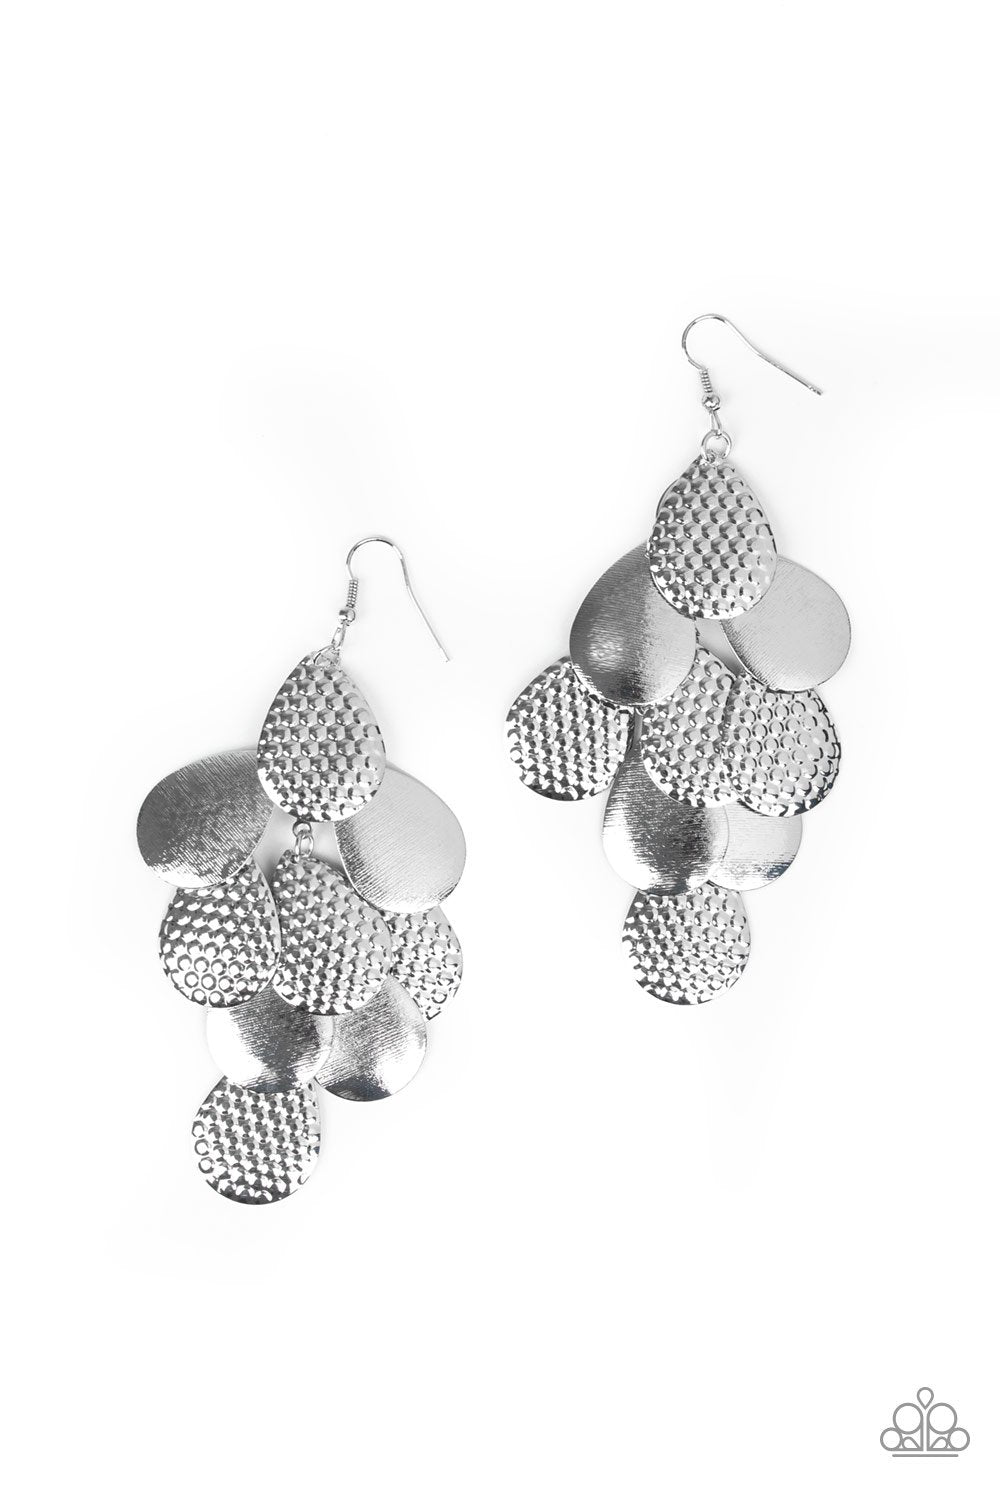 Chime Time- Silver Earrings